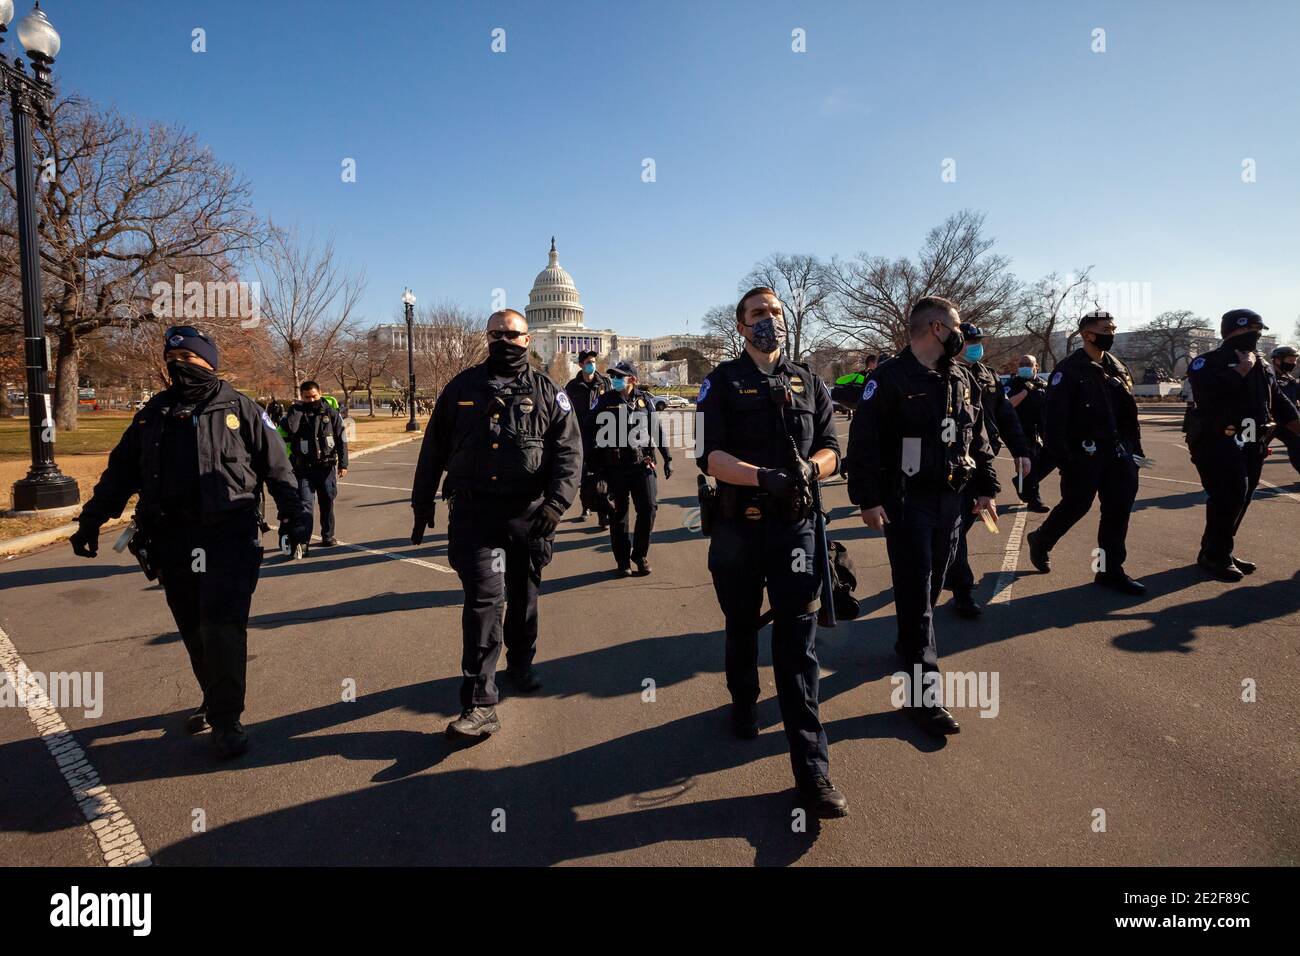 Washington, DC, USA, 13 January, 2021.  Pictured: 13 of the roughly 50 Capitol Police that forced 30 protesters out of an open, public area at the Capitol during Shutdown DC's Expel All Fascists protest.   Protesters wrote the names of Representatives and Senators who objected to certification of the presidential election results on January 6 on three large banners.  The banners called expulsion of all fascists from Congress.  Credit: Allison C Bailey/Alamy Live News Stock Photo